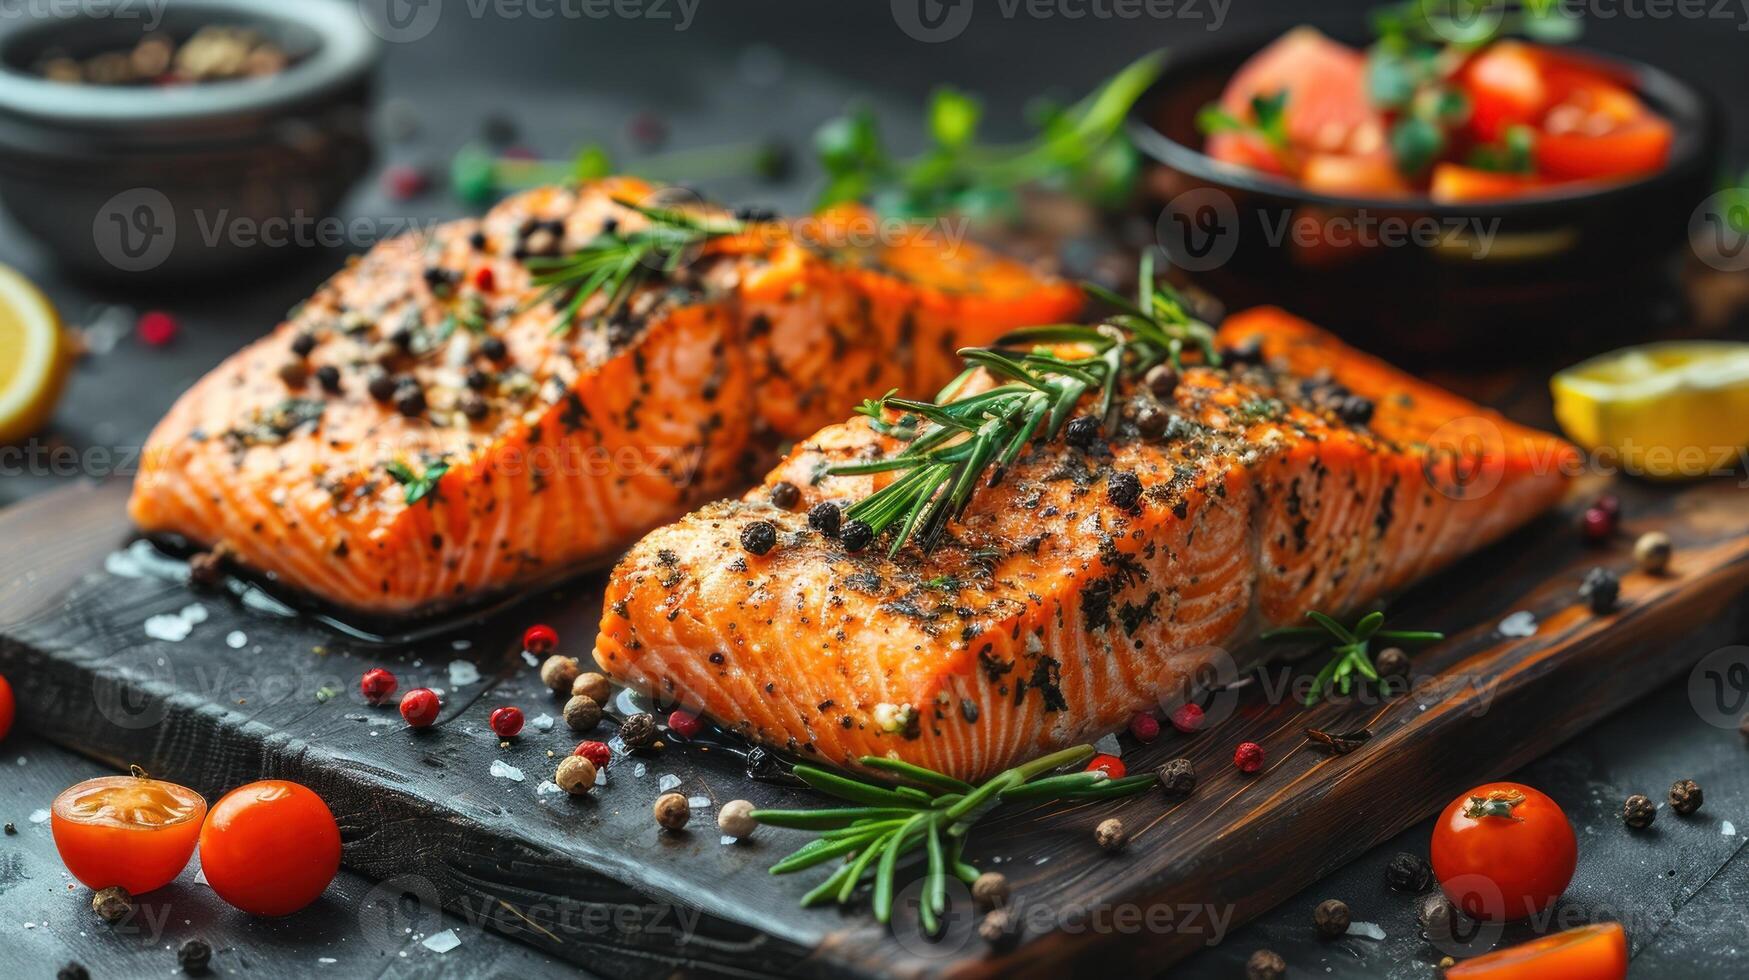 Two fresh salmons arranged on a wooden cutting board with vibrant herbs and tomatoes photo